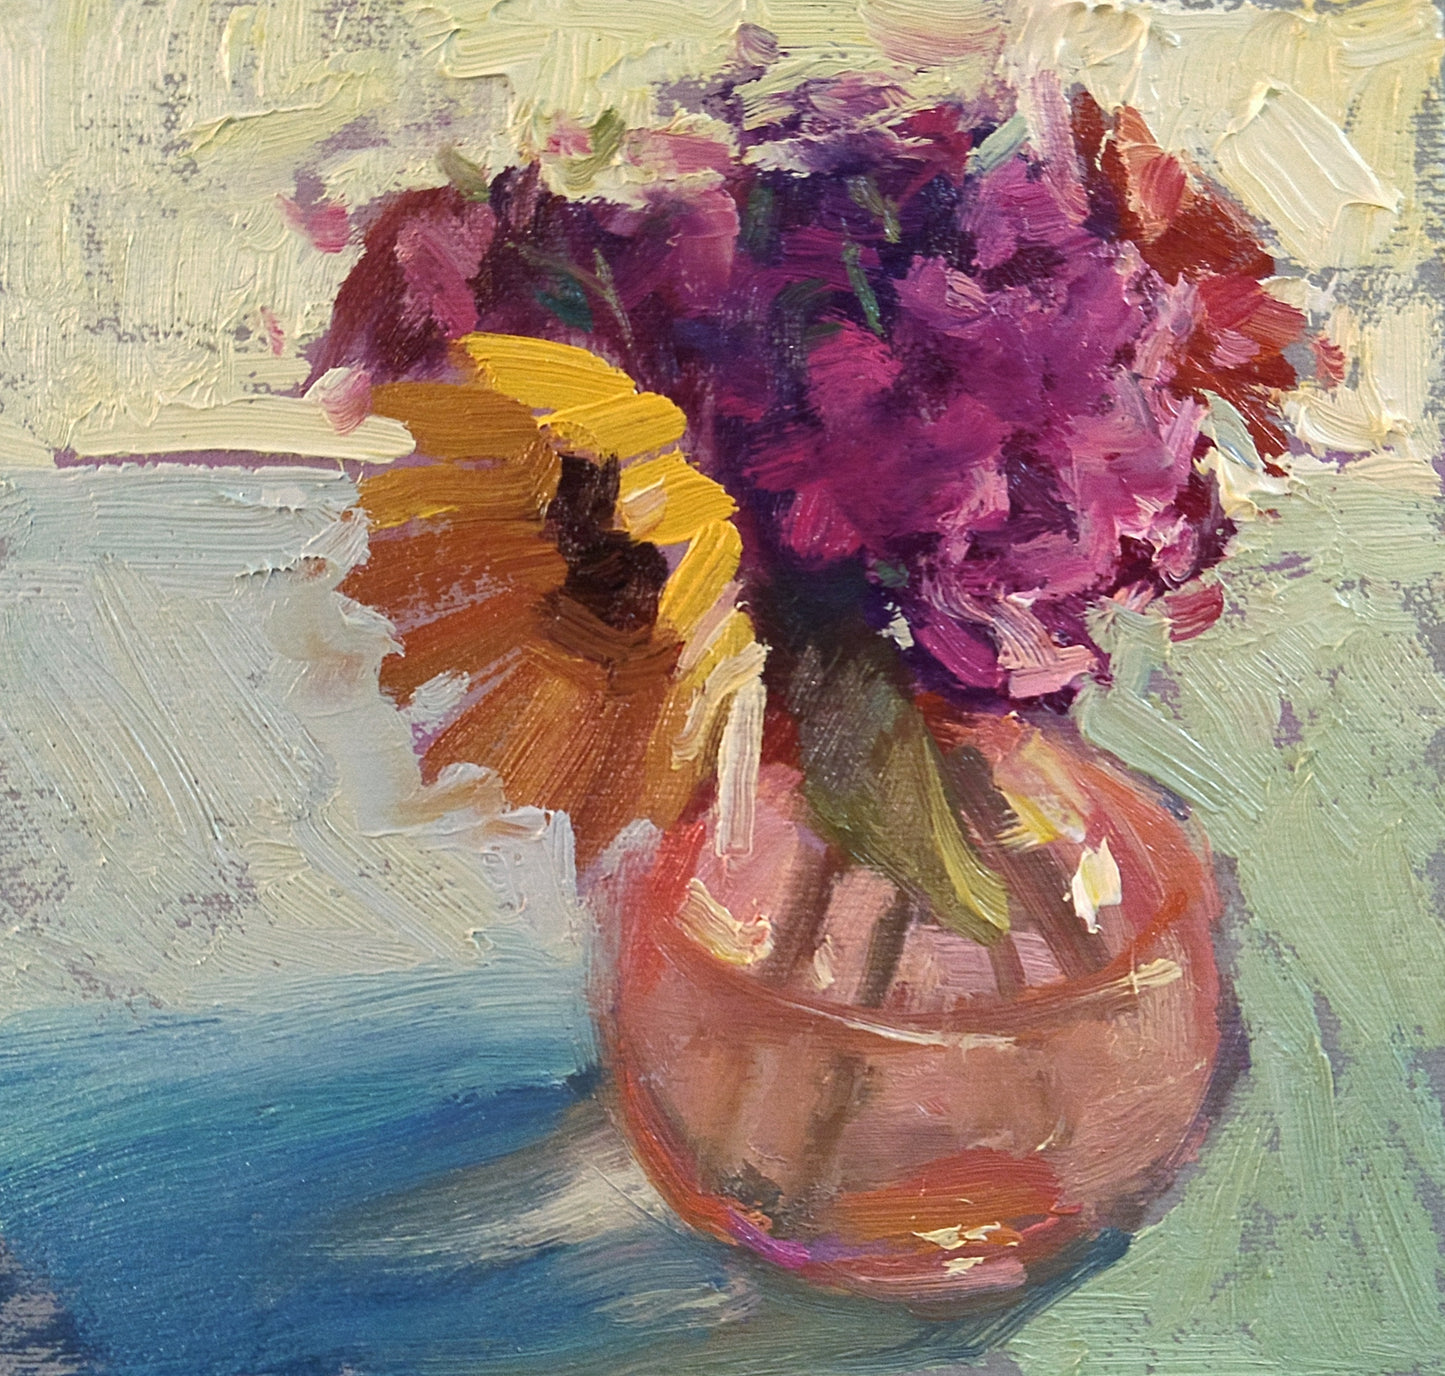 "Day 10" 6x6 original oil painting by Artist Kristina Sellers